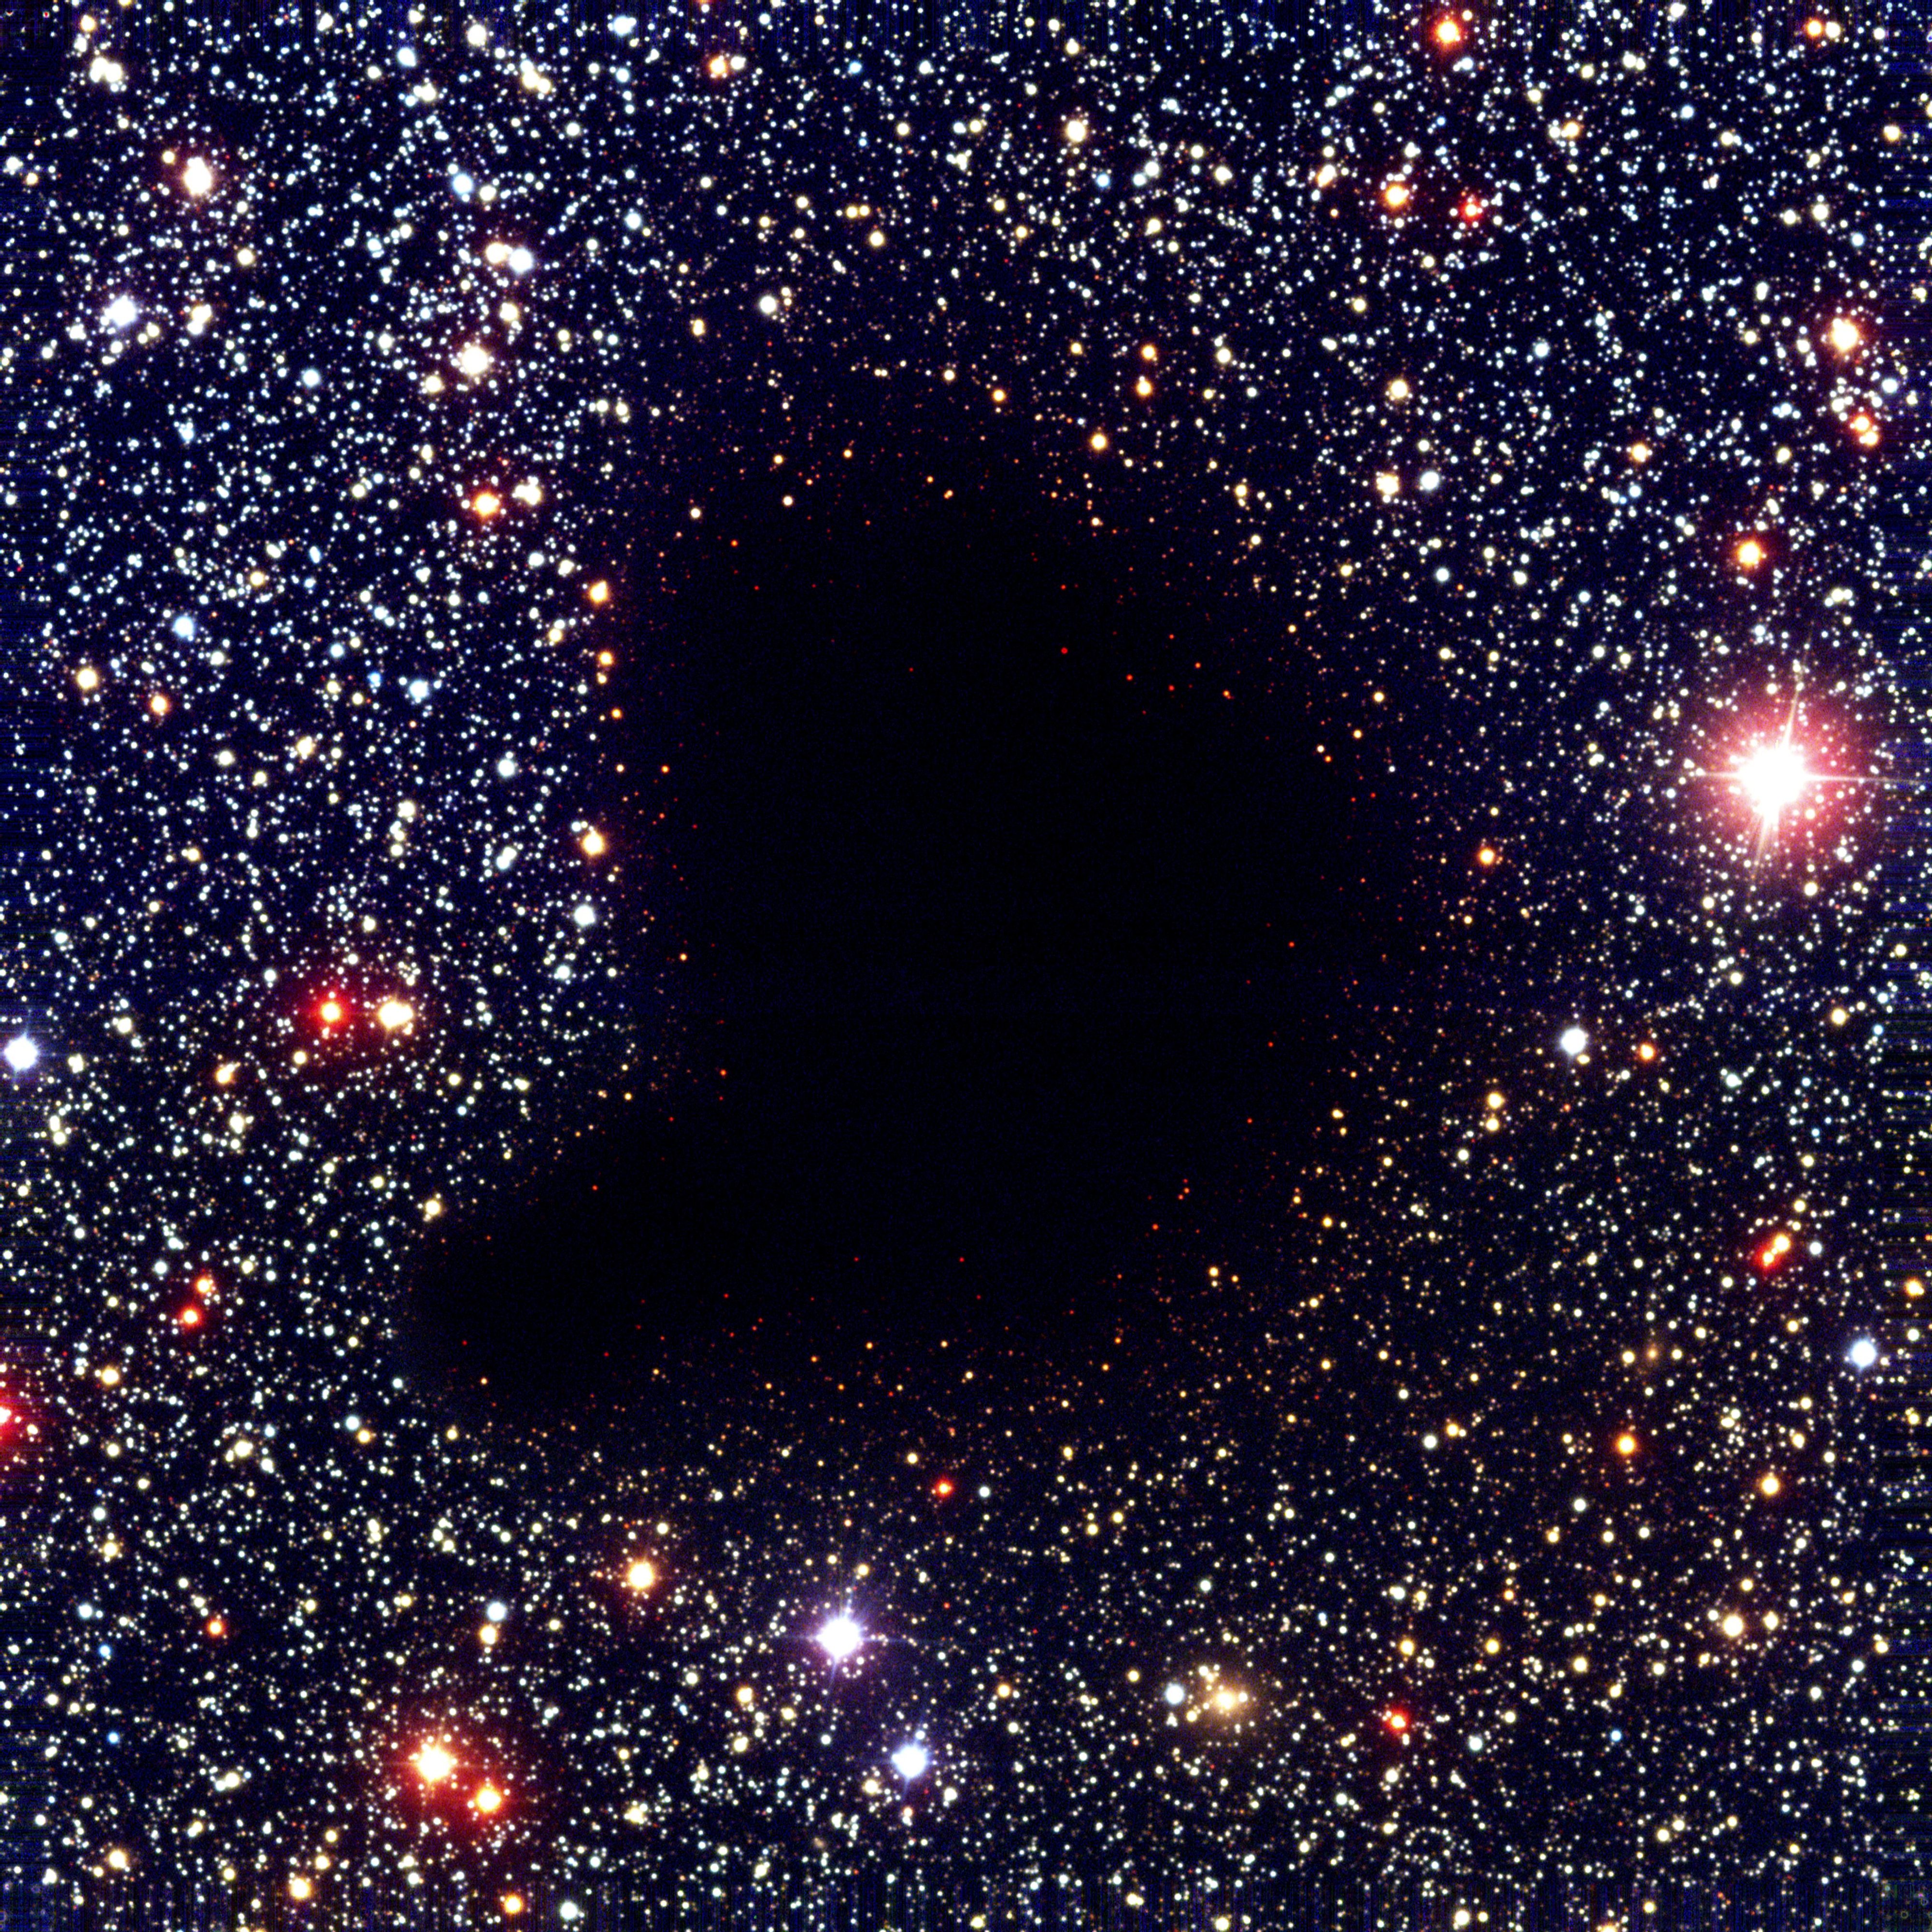 New Dark Energy Data Emerges from some Misshapen, Distorted, Ancient Voids  | Live Science